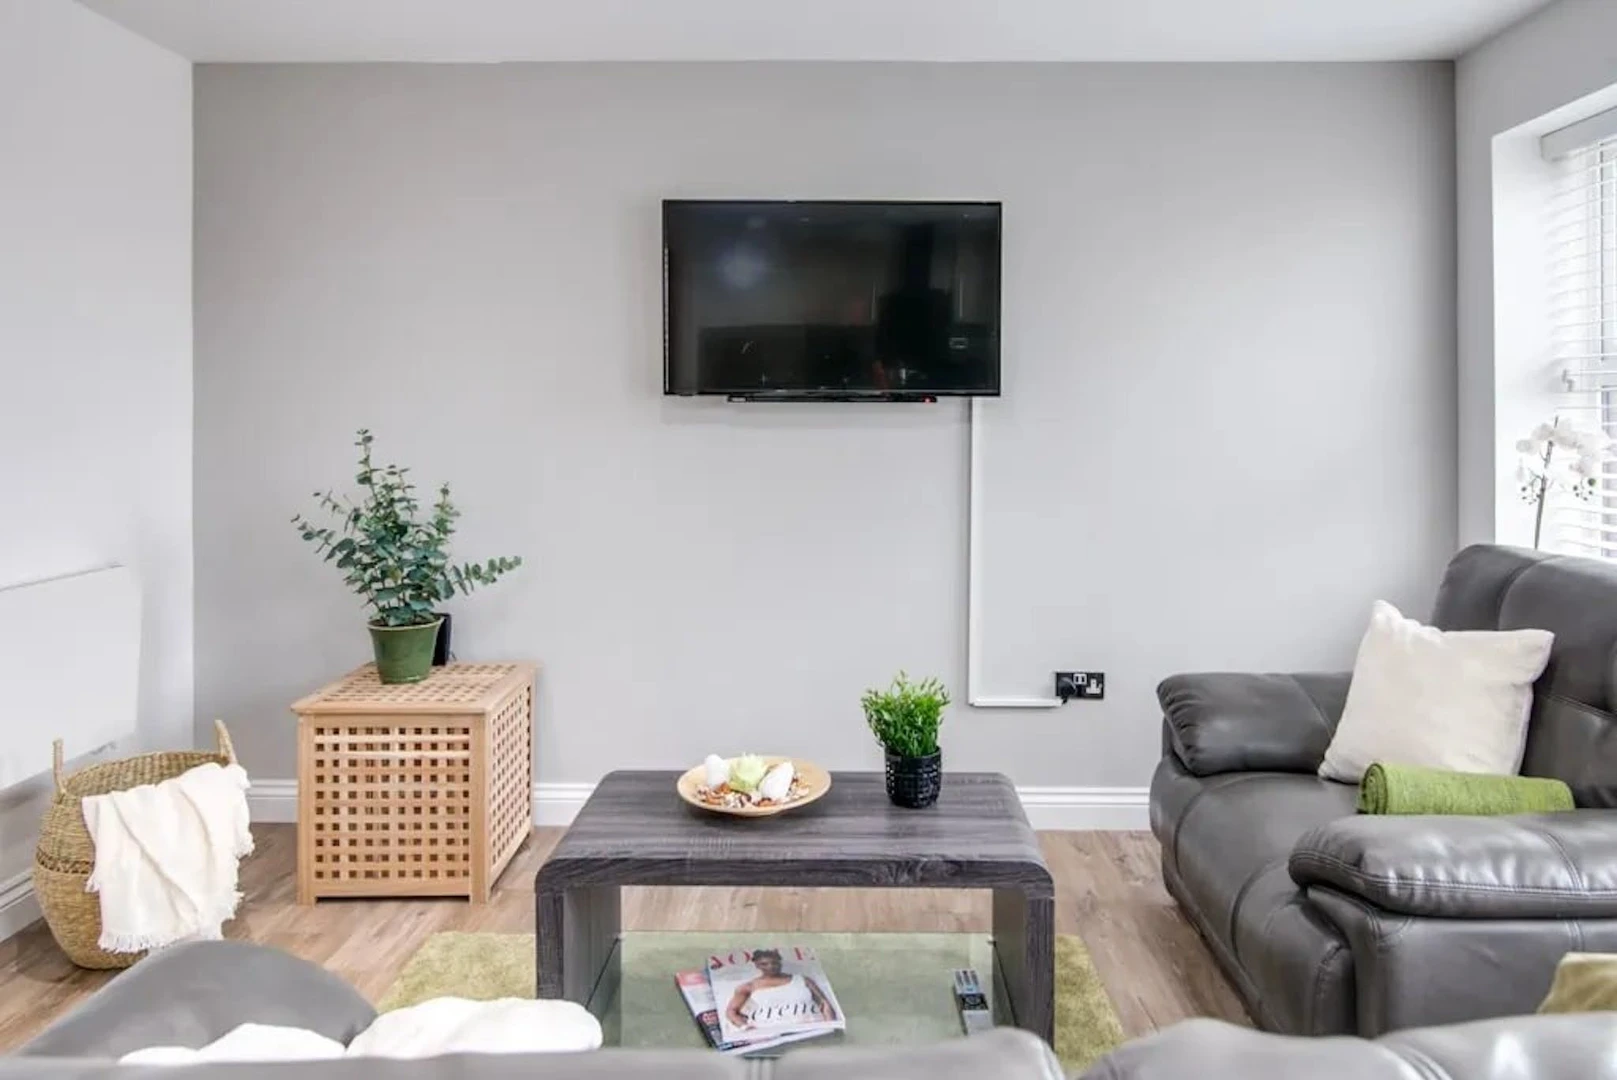 Accommodation with 3 bedrooms in Birmingham